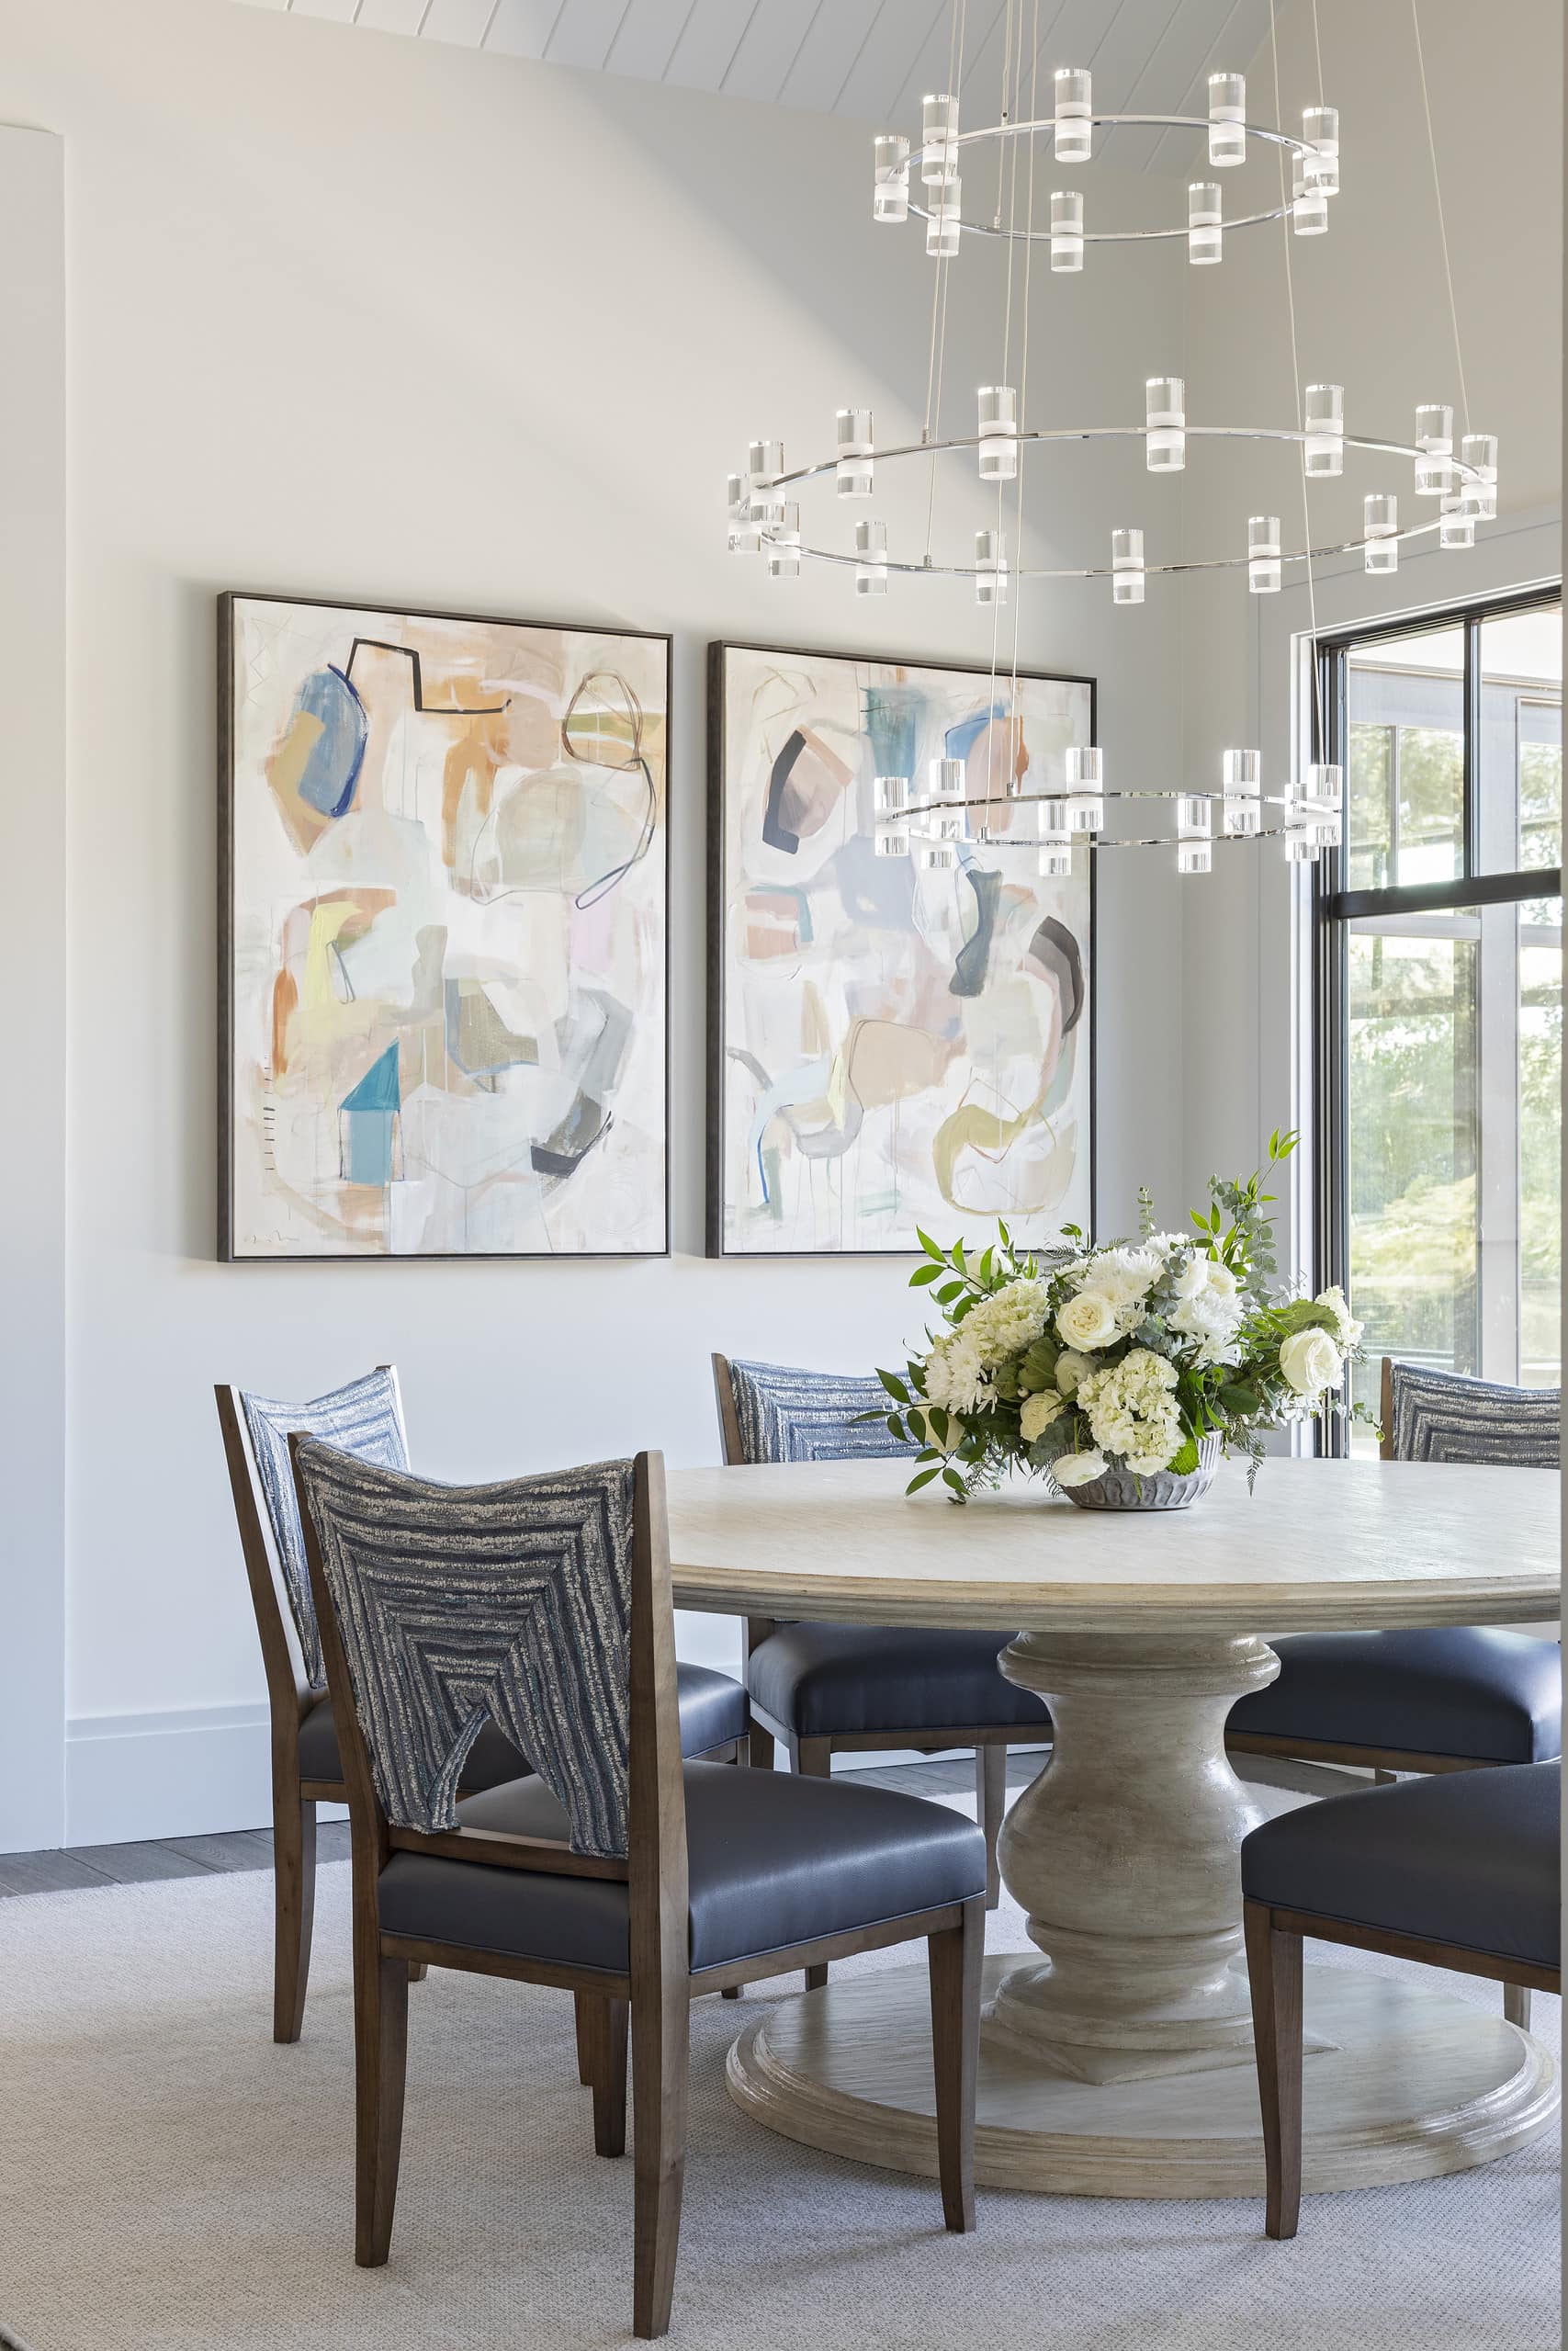 Home tour featuring modern dining room designed by Margaret Donaldson